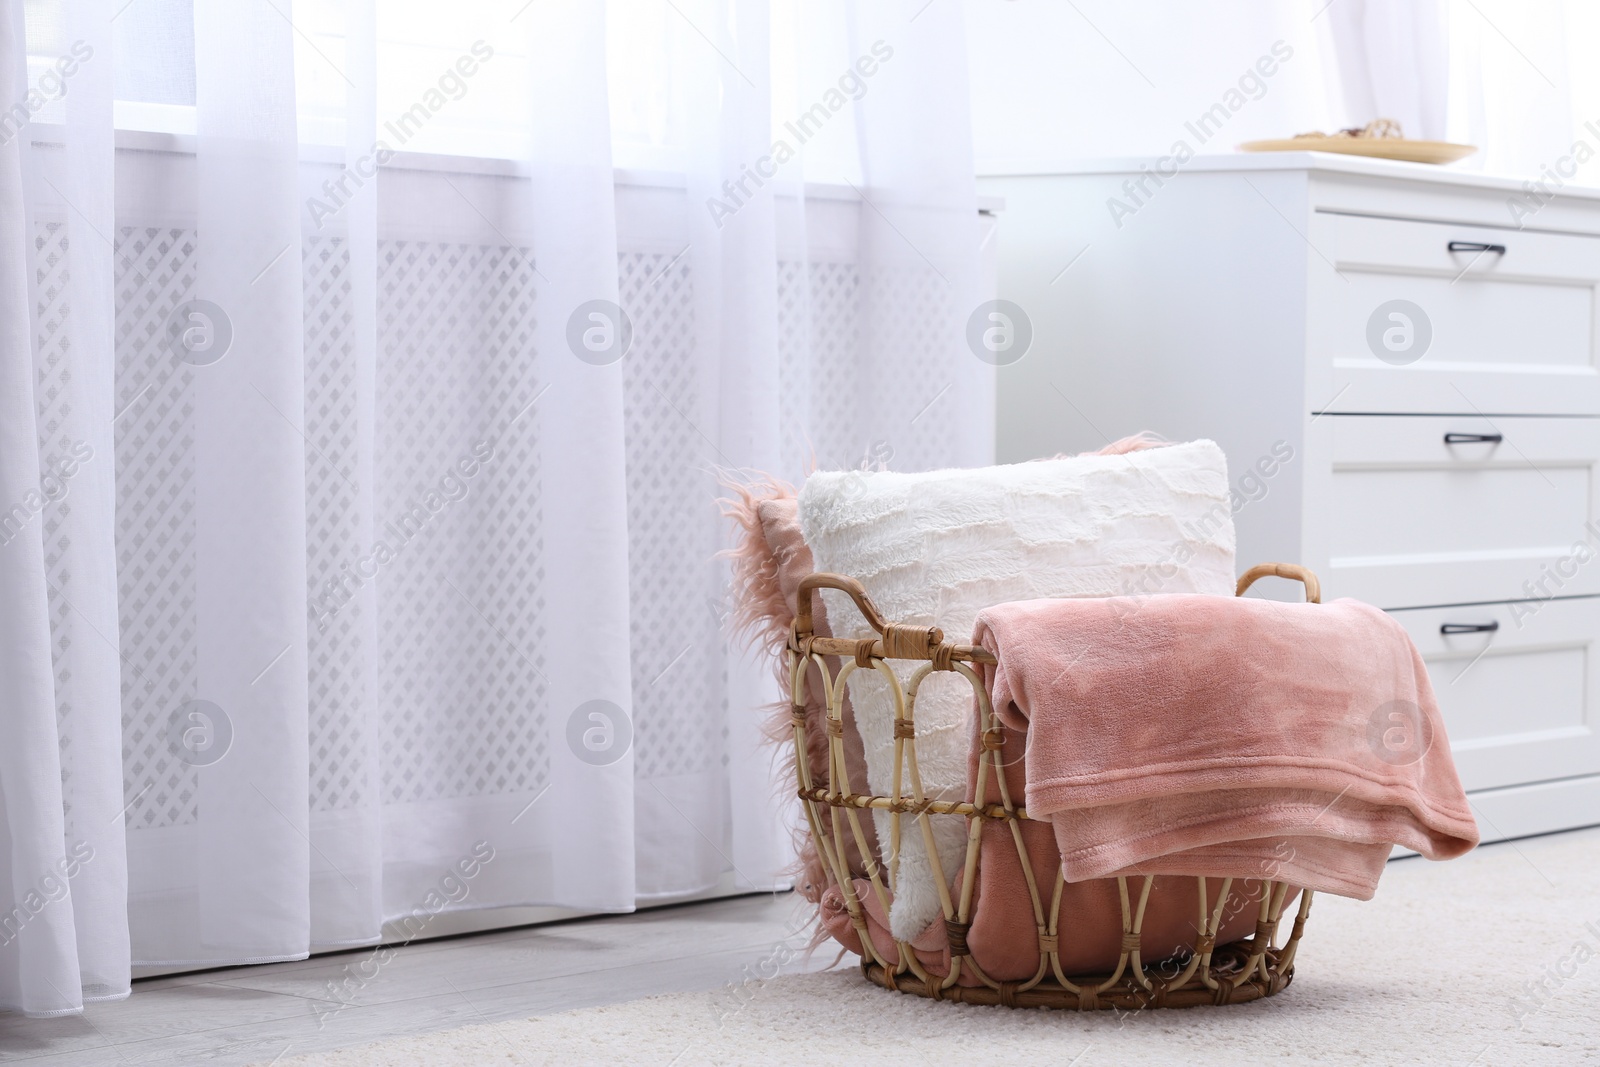 Photo of Basket with soft plaid and pillows in modern room interior